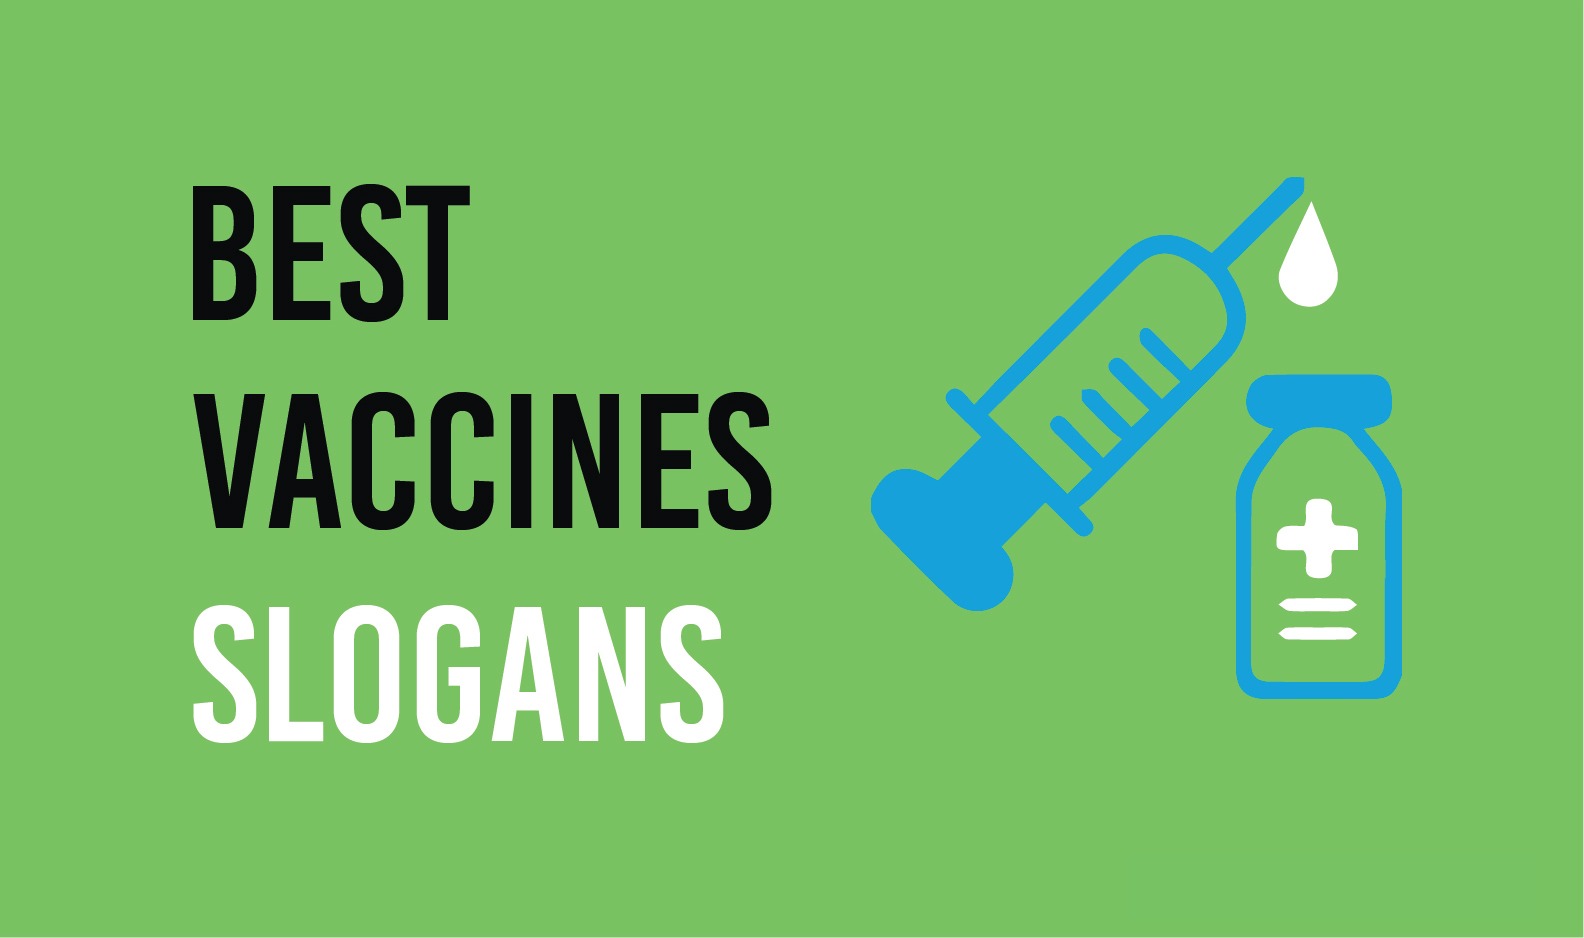 45 Slogans for Vaccines